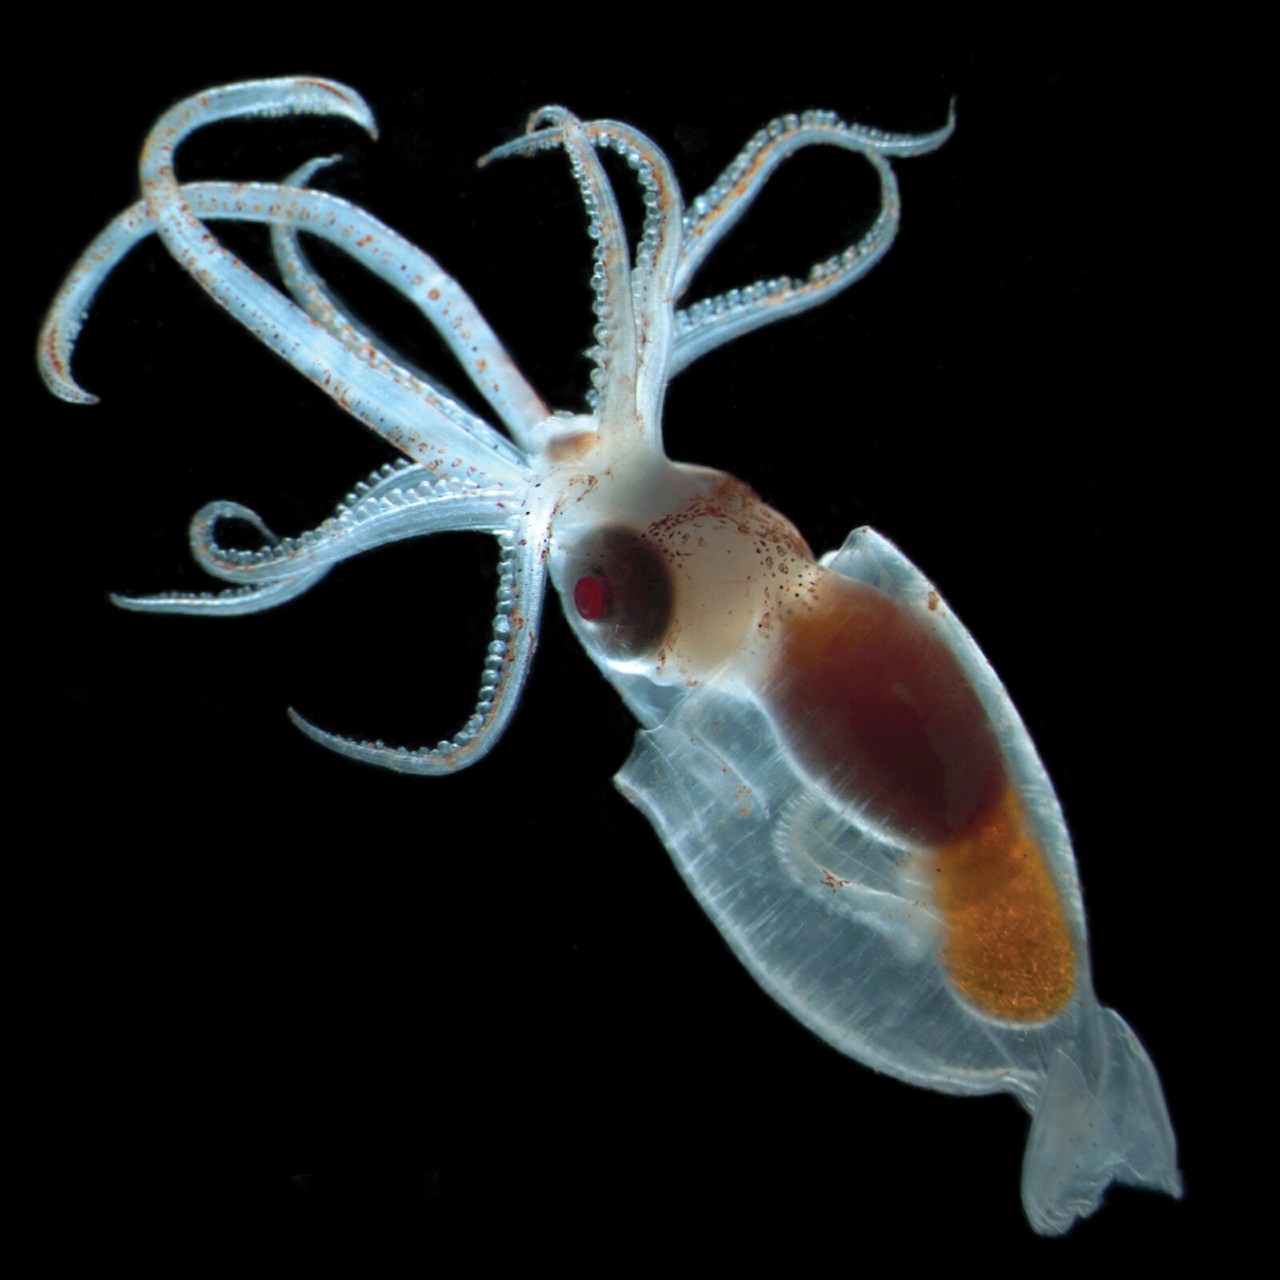 This cranchid squid larva is only 10 mm long, but adults can grow up to 2 metres. Image courtesy Russ Hopcroft